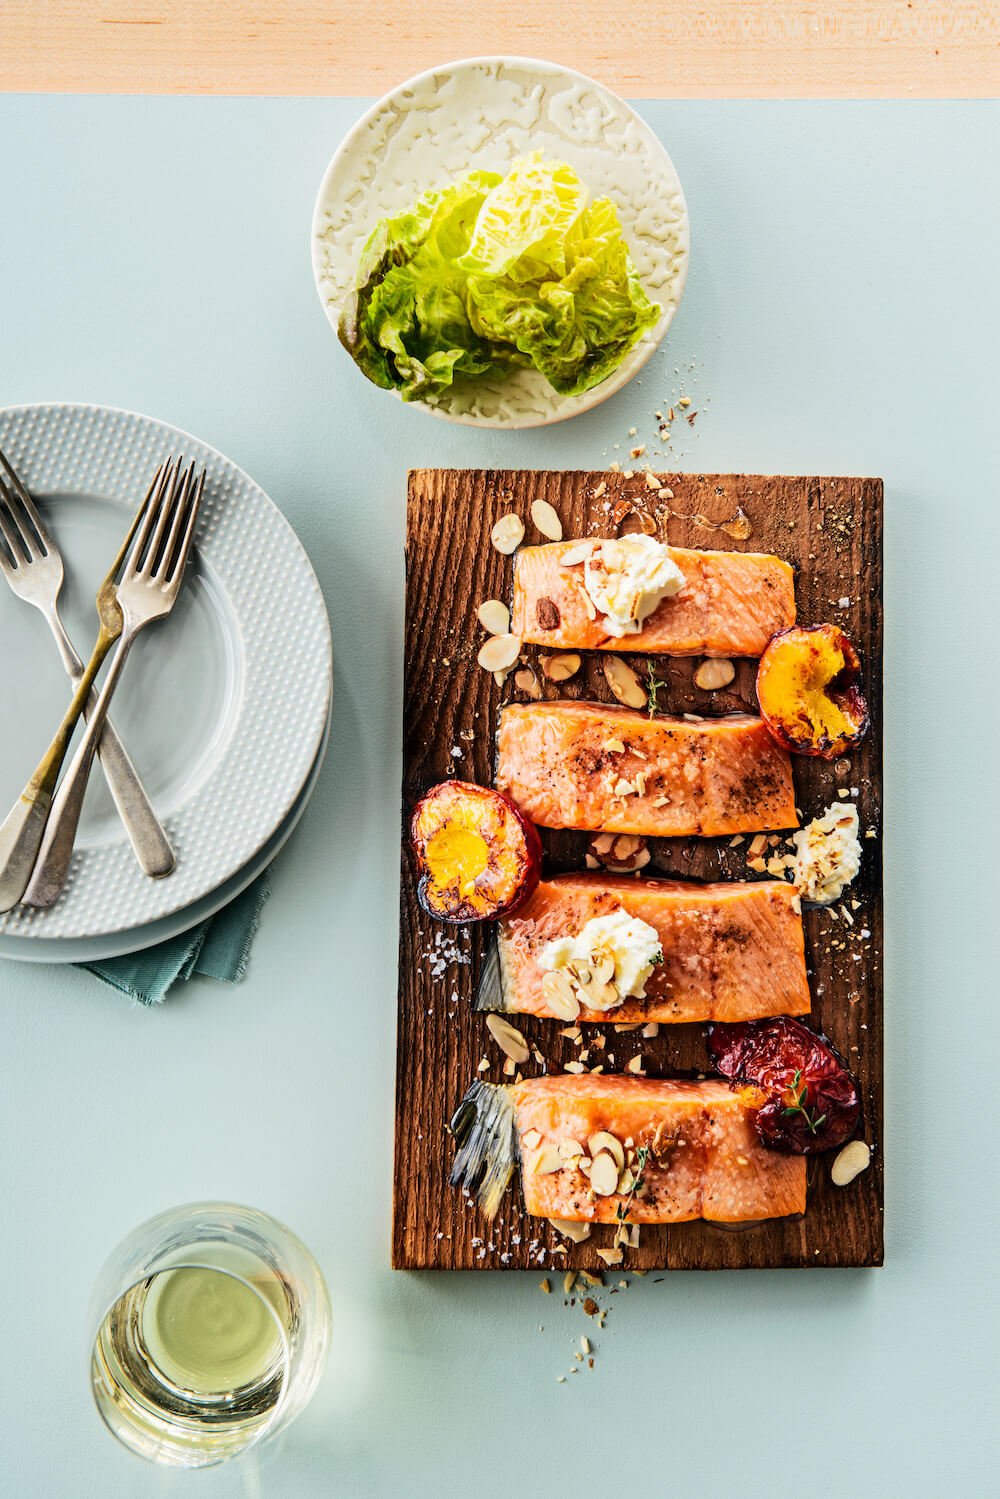 Four salmon fillets on a cutting board with plates, salad and wine on the table nearby.